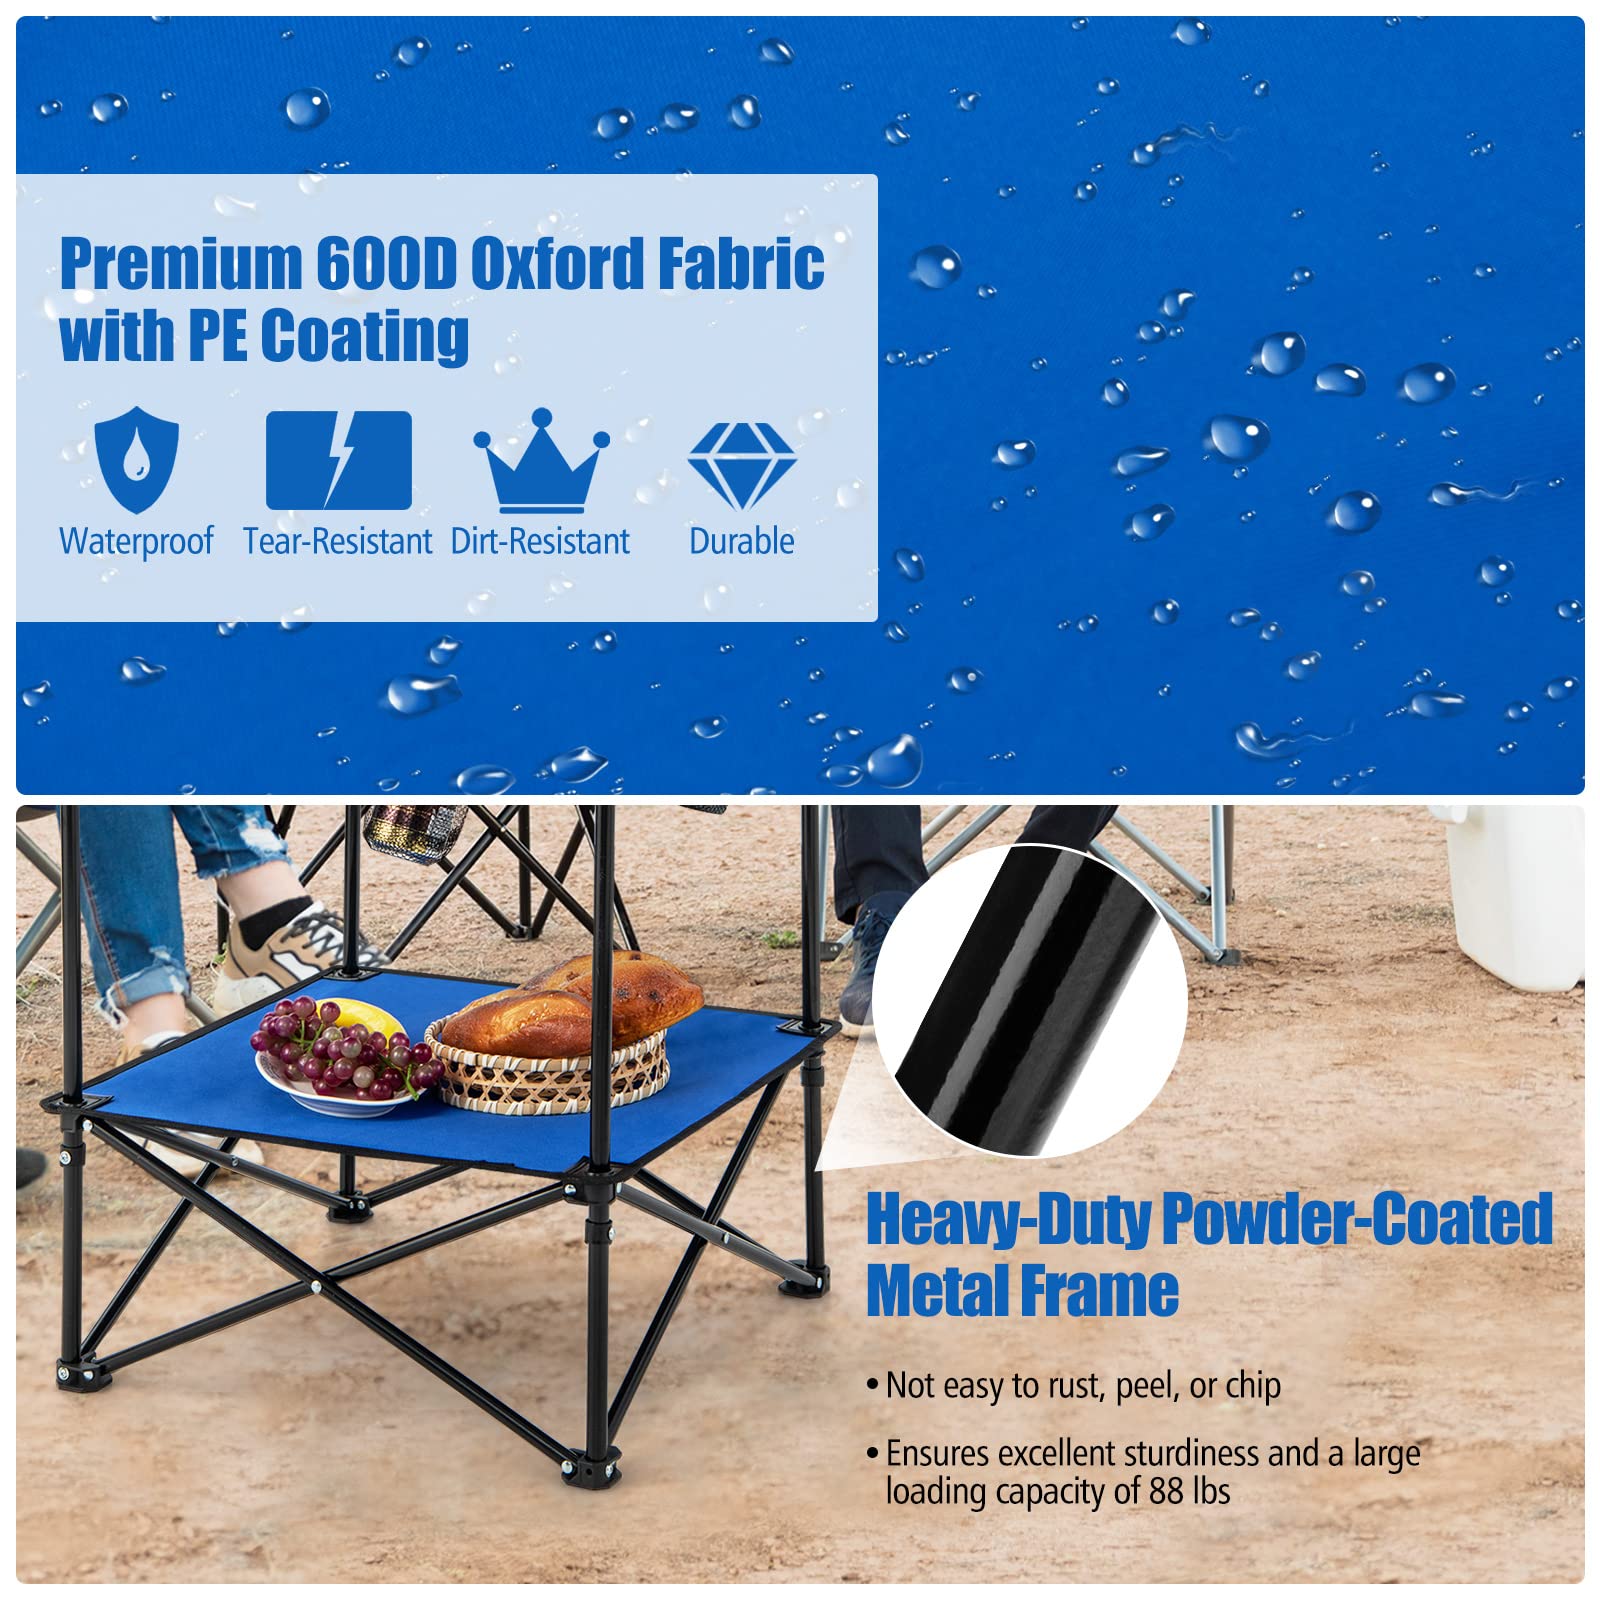 Giantex Folding Camping Table, 2-Tier Portable Picnic Table w/Carrying Bag, 4 Cup Holders